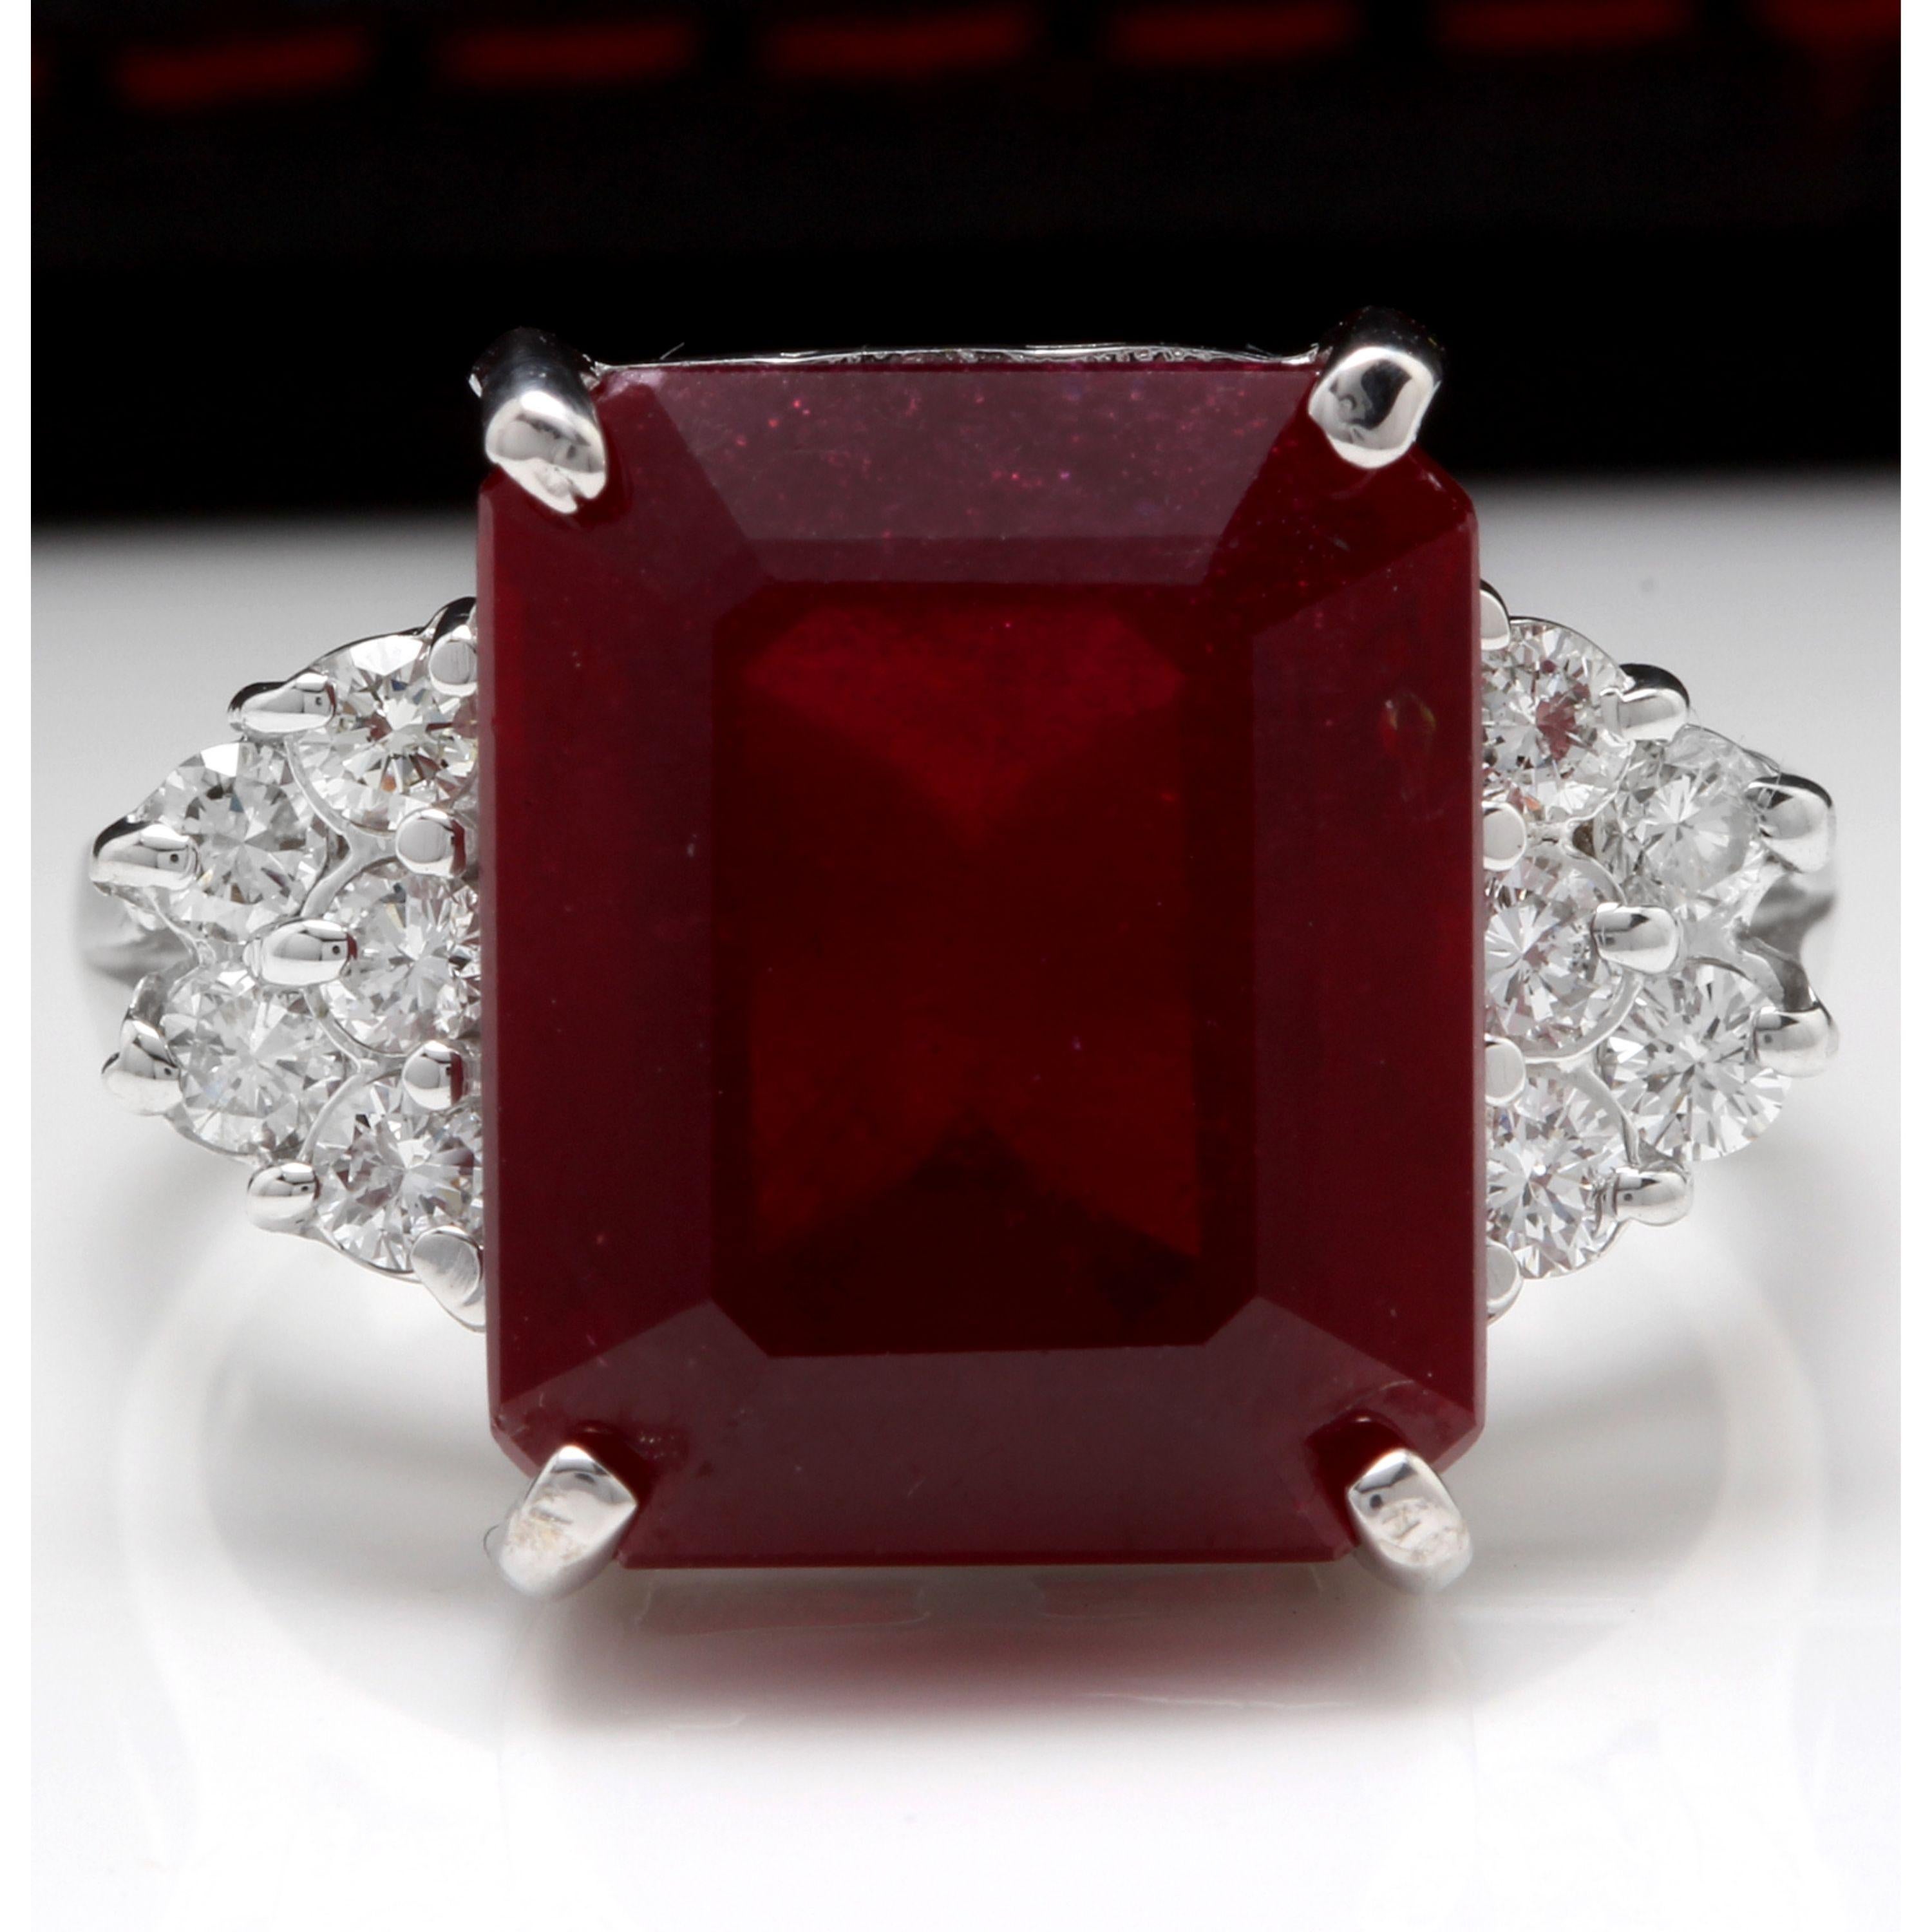 13.00 Carats Impressive Natural Red Ruby and Diamond 14K White Gold Ring

Total Red Ruby Weight is Approx. 12.50 Carats

Ruby Treatment: Lead Glass Filling

Ruby Measures: Approx. 13.00 x 11.00mm

Natural Round Diamonds Weight: Approx. 0.50 Carats